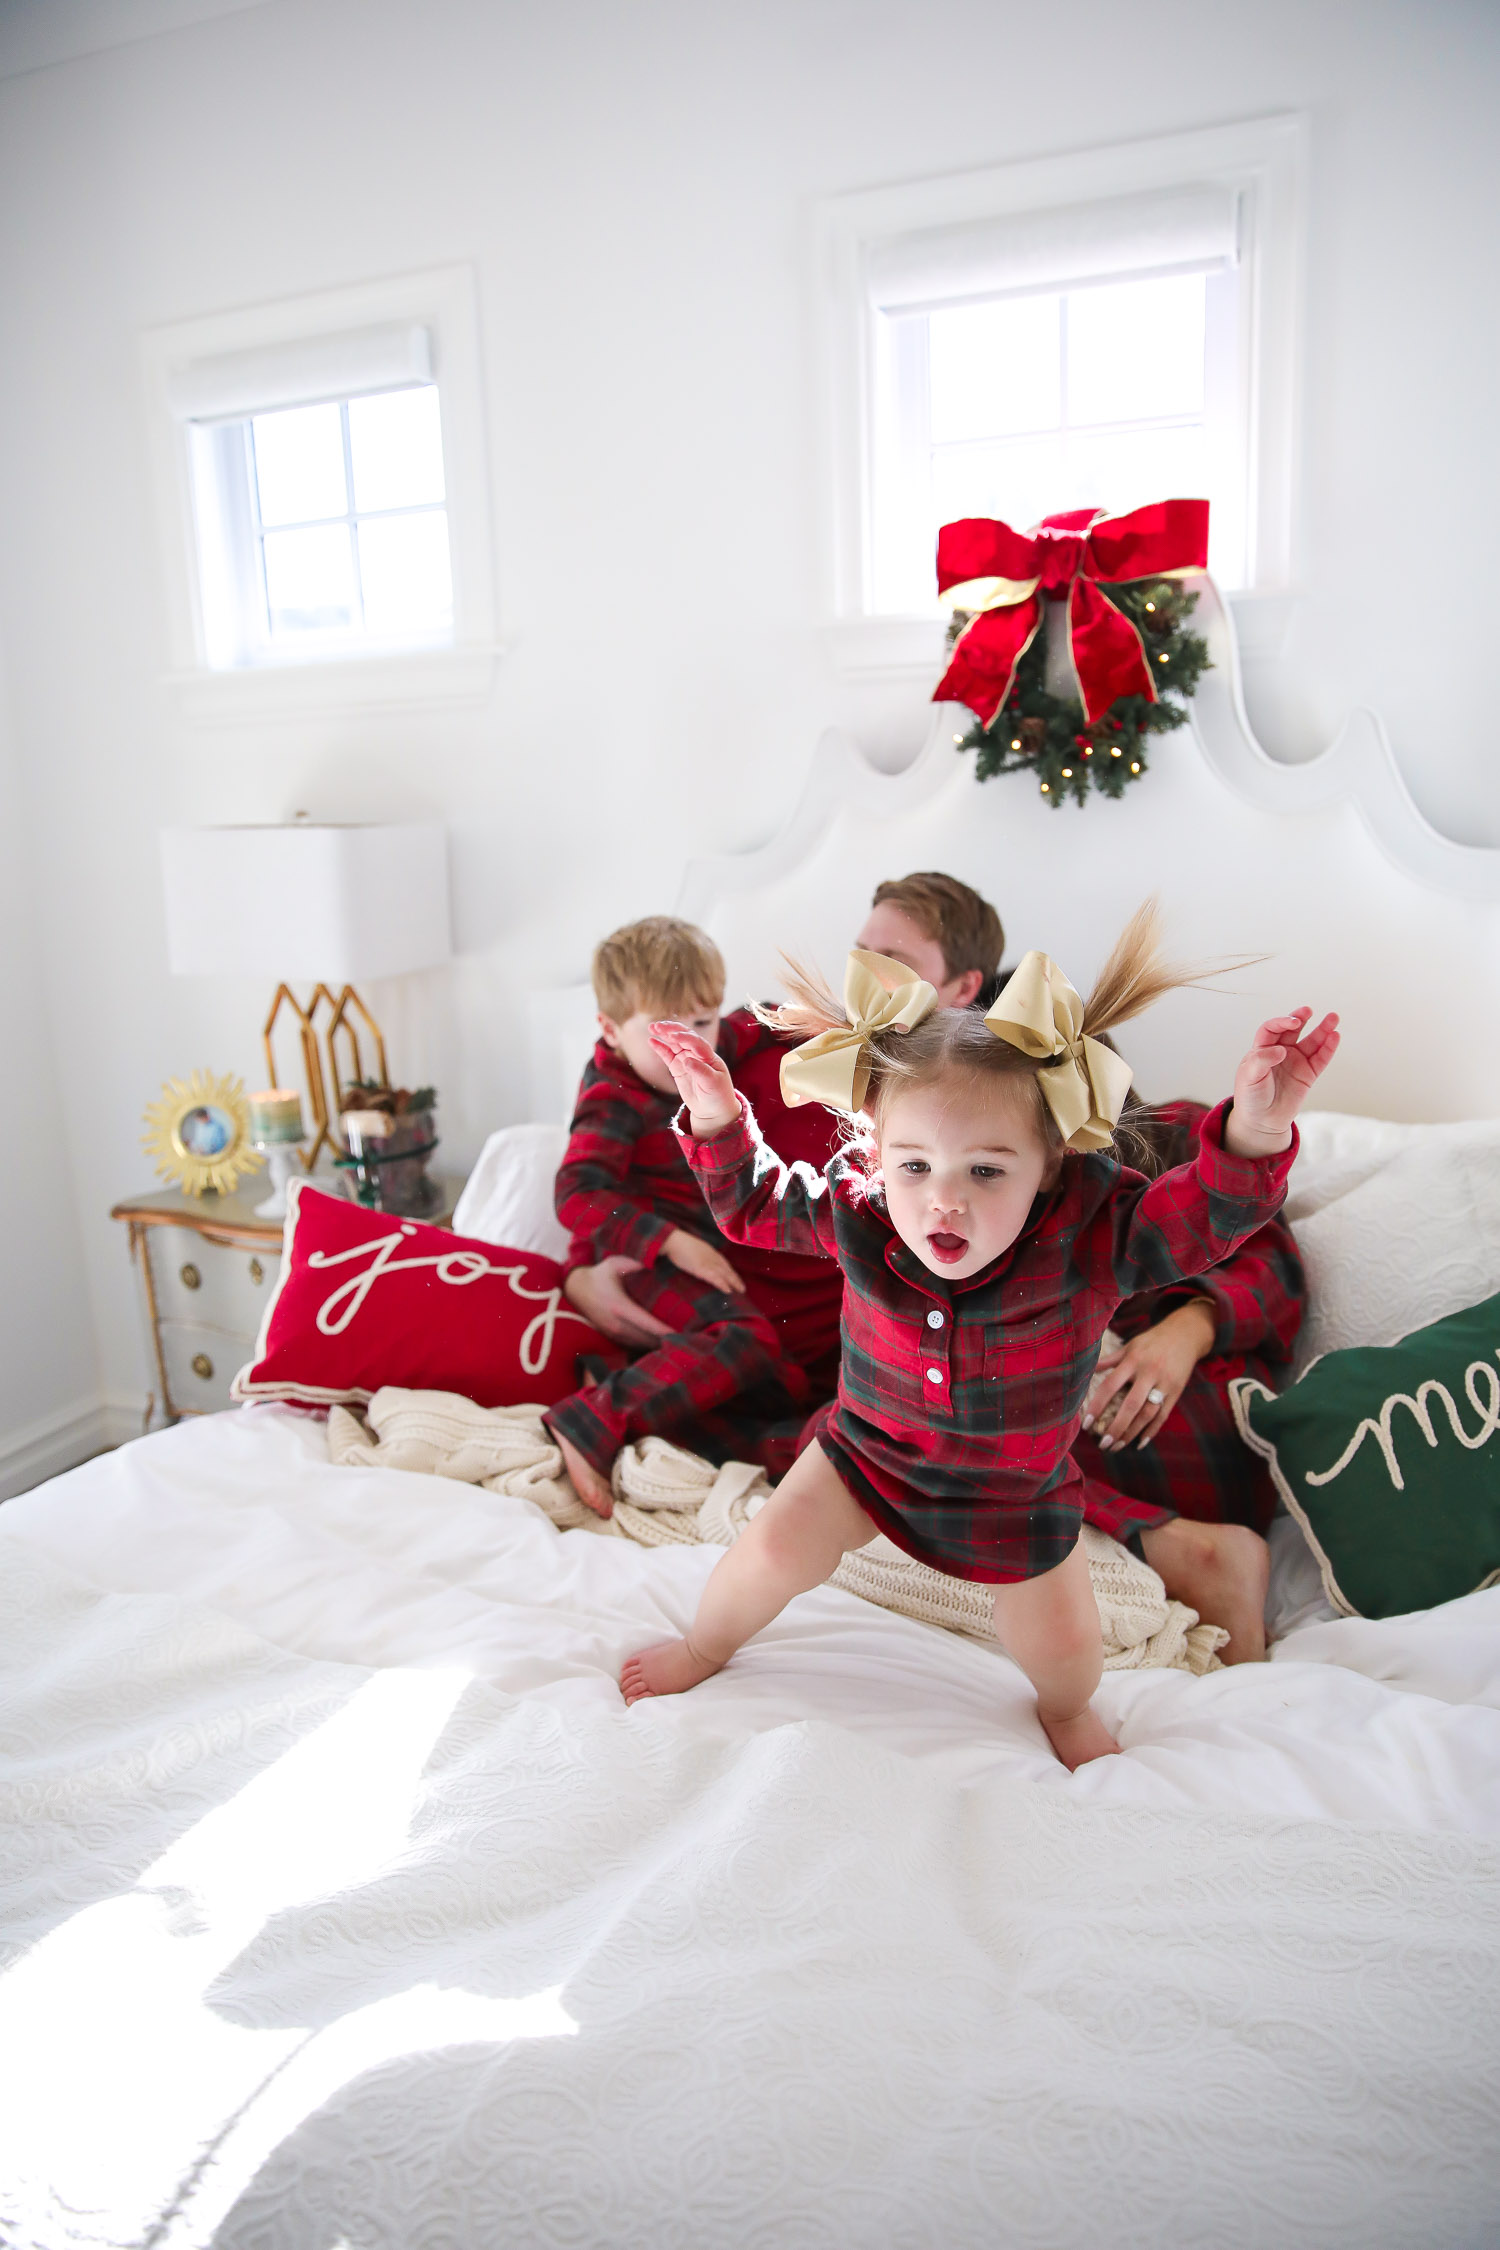 Matching Family Pajamas by popular US fashion blog, The Sweetest Thing: image of a family sitting on a bed with white bedding, a joy throw pillow, a merry throw pillow and a mini Christmas wreath hanging on the headboard and wearing a The Company Store Family Flannel Company Cotton™ Womens Pajama Set, The Company Store Family Flannel Company Cotton™ Girls’ Sleepshirt, The Company Store Family Flannel Company Cotton™ Kids’ Pajama Set, The Company Store Family Flannel Company Cotton™ Mens Pajama Set, and The Company Store Family Flannel Company Cotton™ Dog Pajamas.